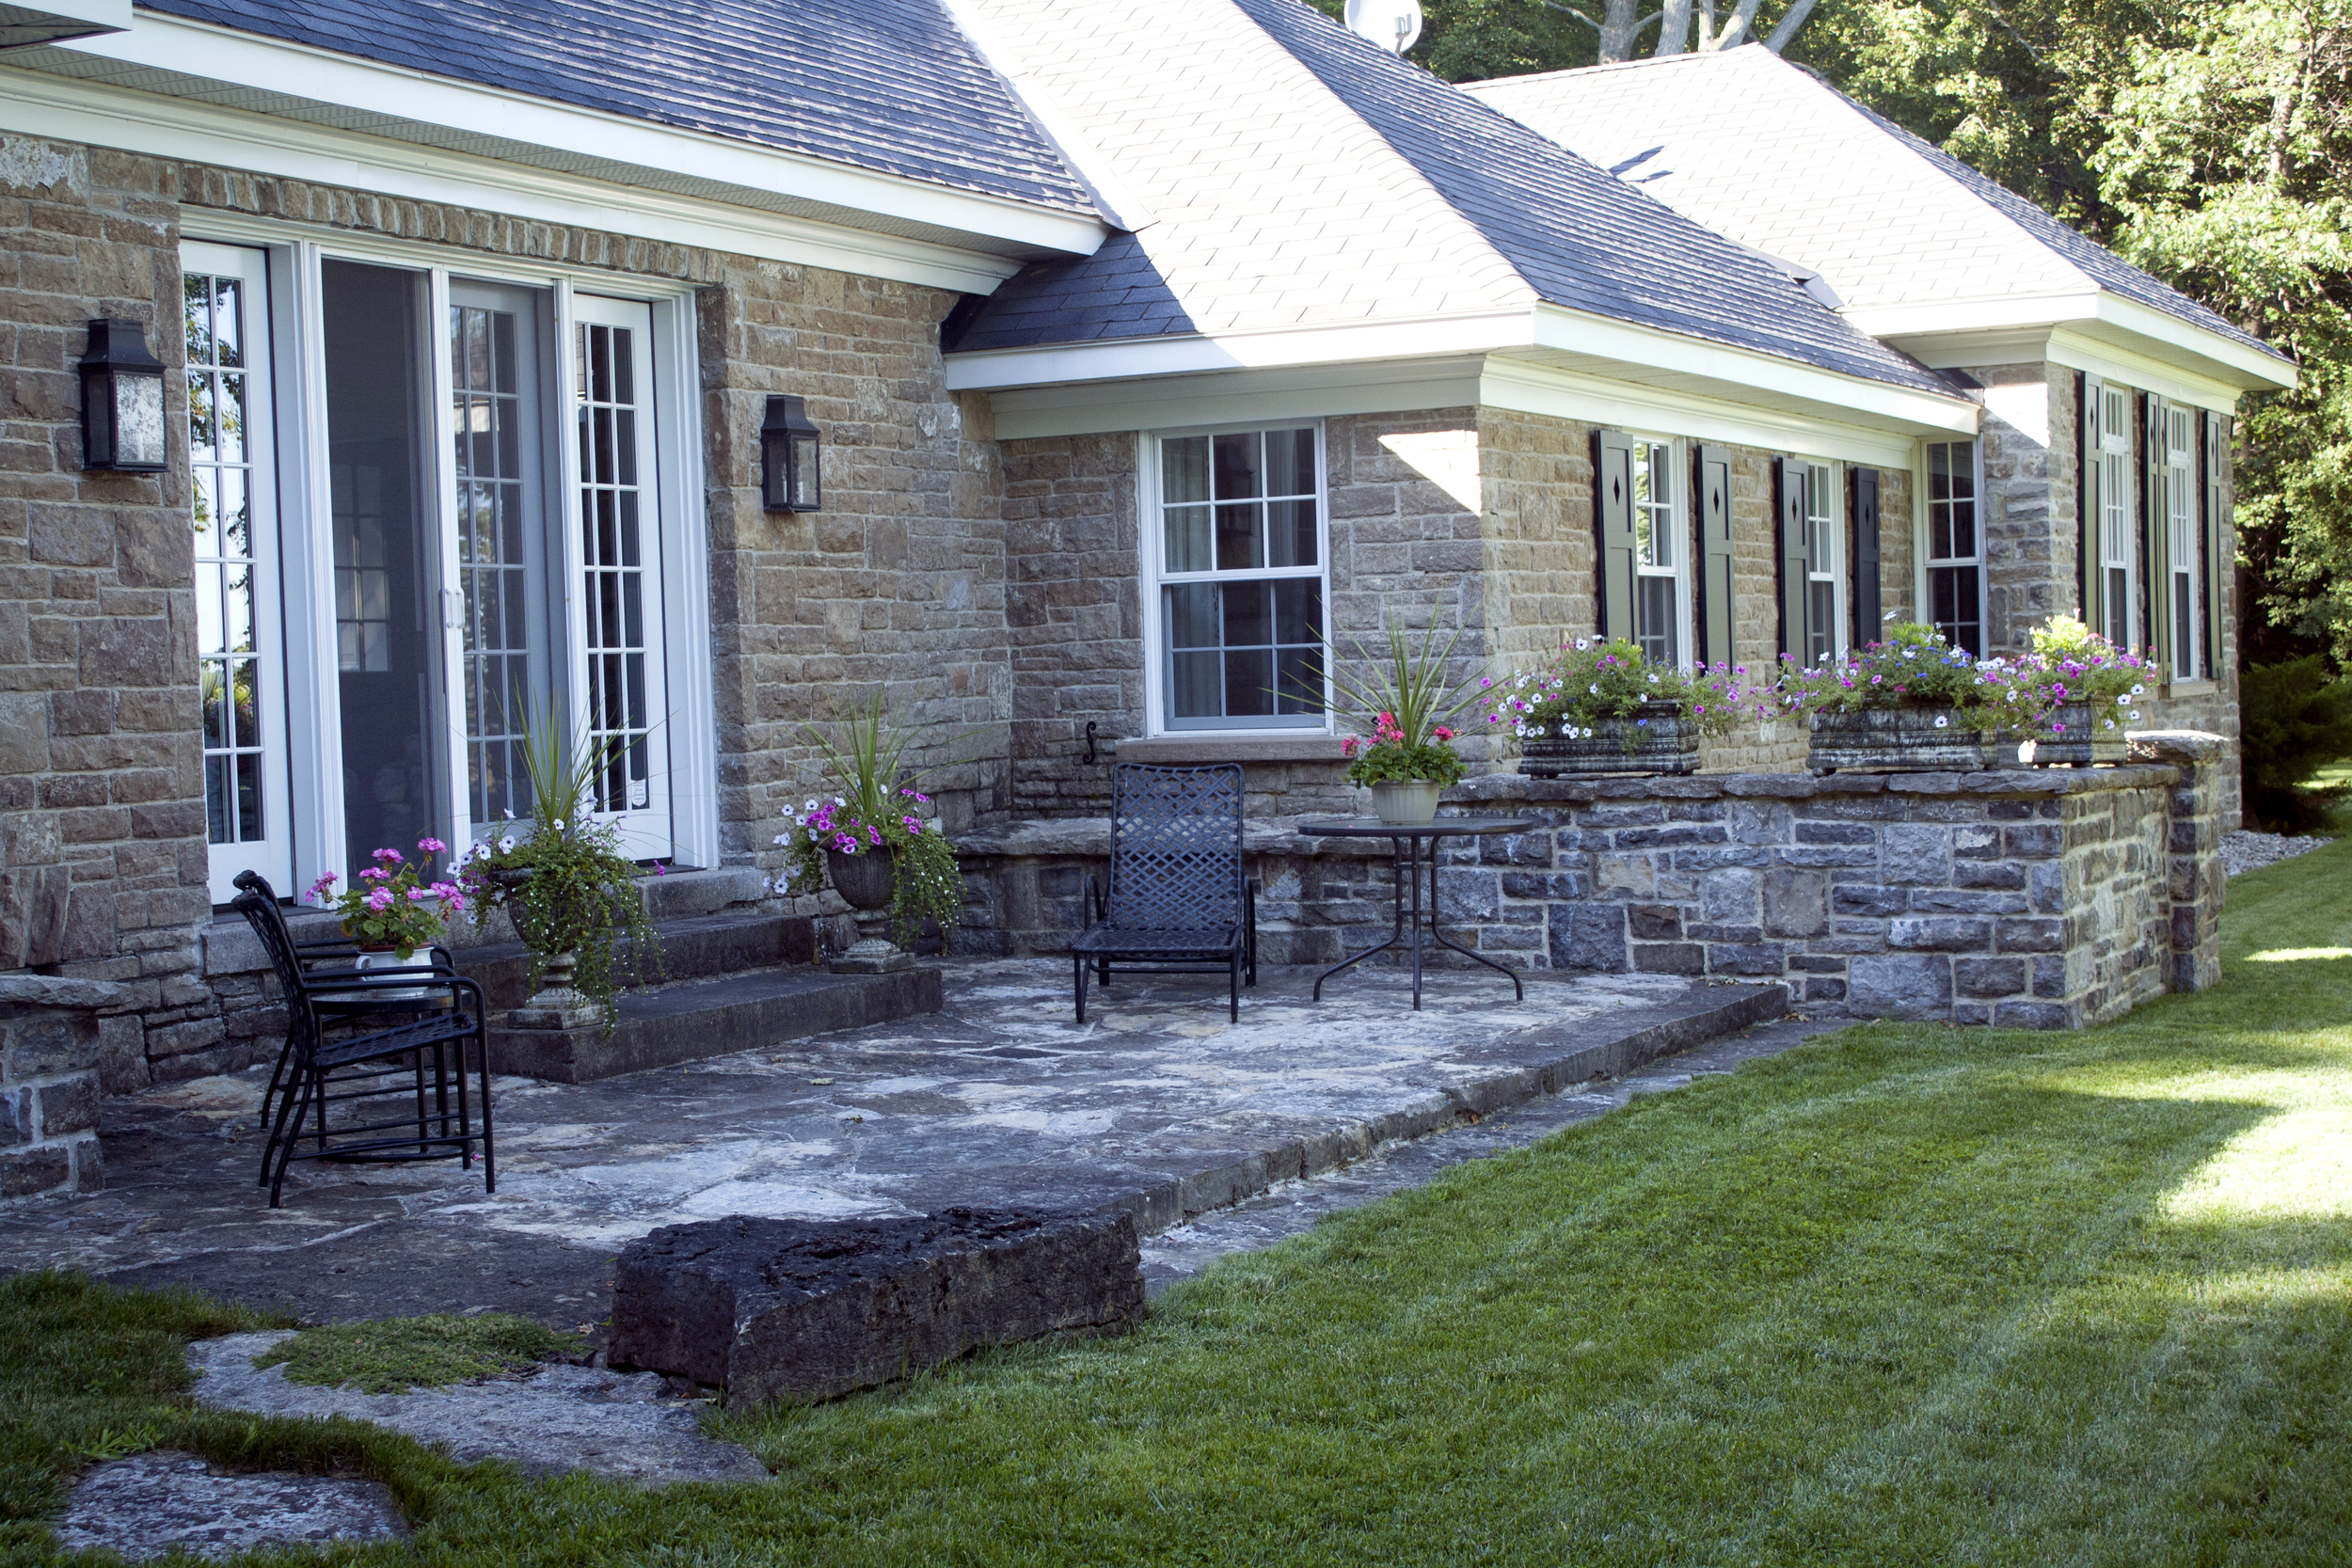 New Home With A Heritage Feel | Landscape Architecture | Riverview Design Solutions | Prescott, Ontario, Canada